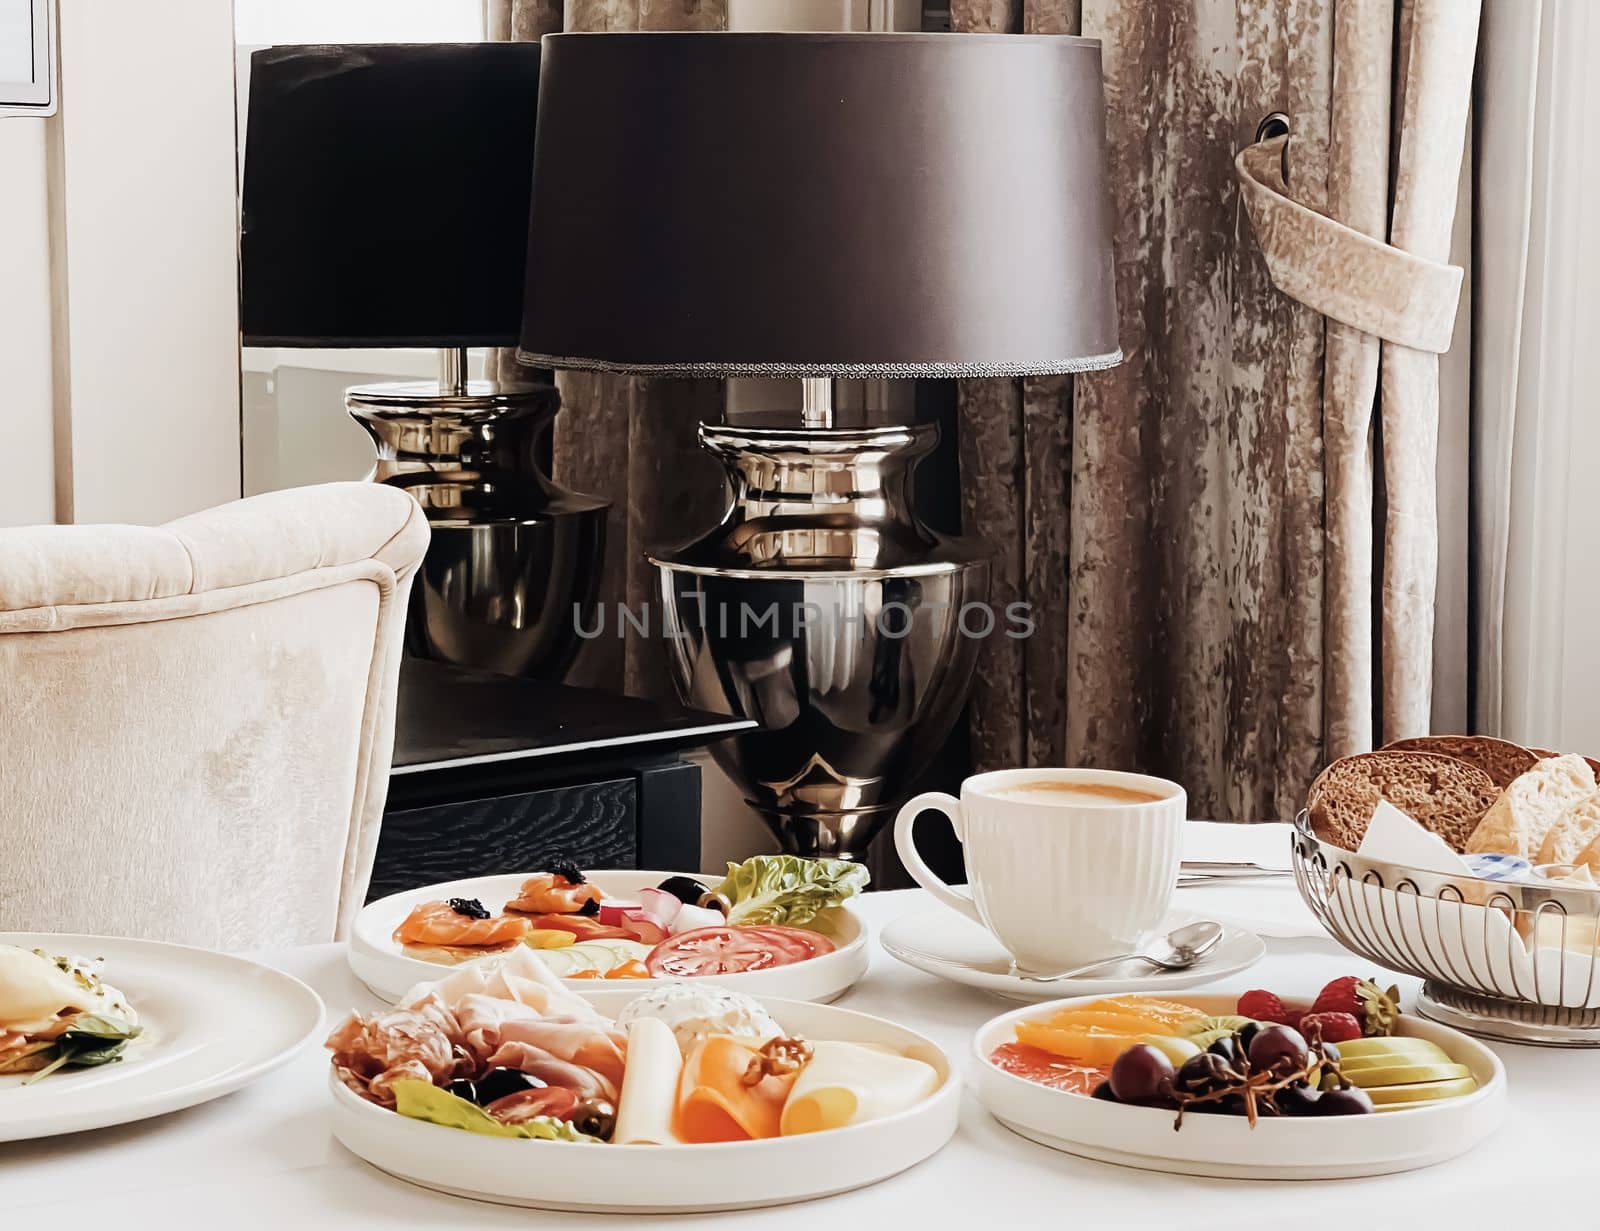 Luxury hotel and five star room service, various food platters, bread and coffee as in-room breakfast for travel and hospitality by Anneleven